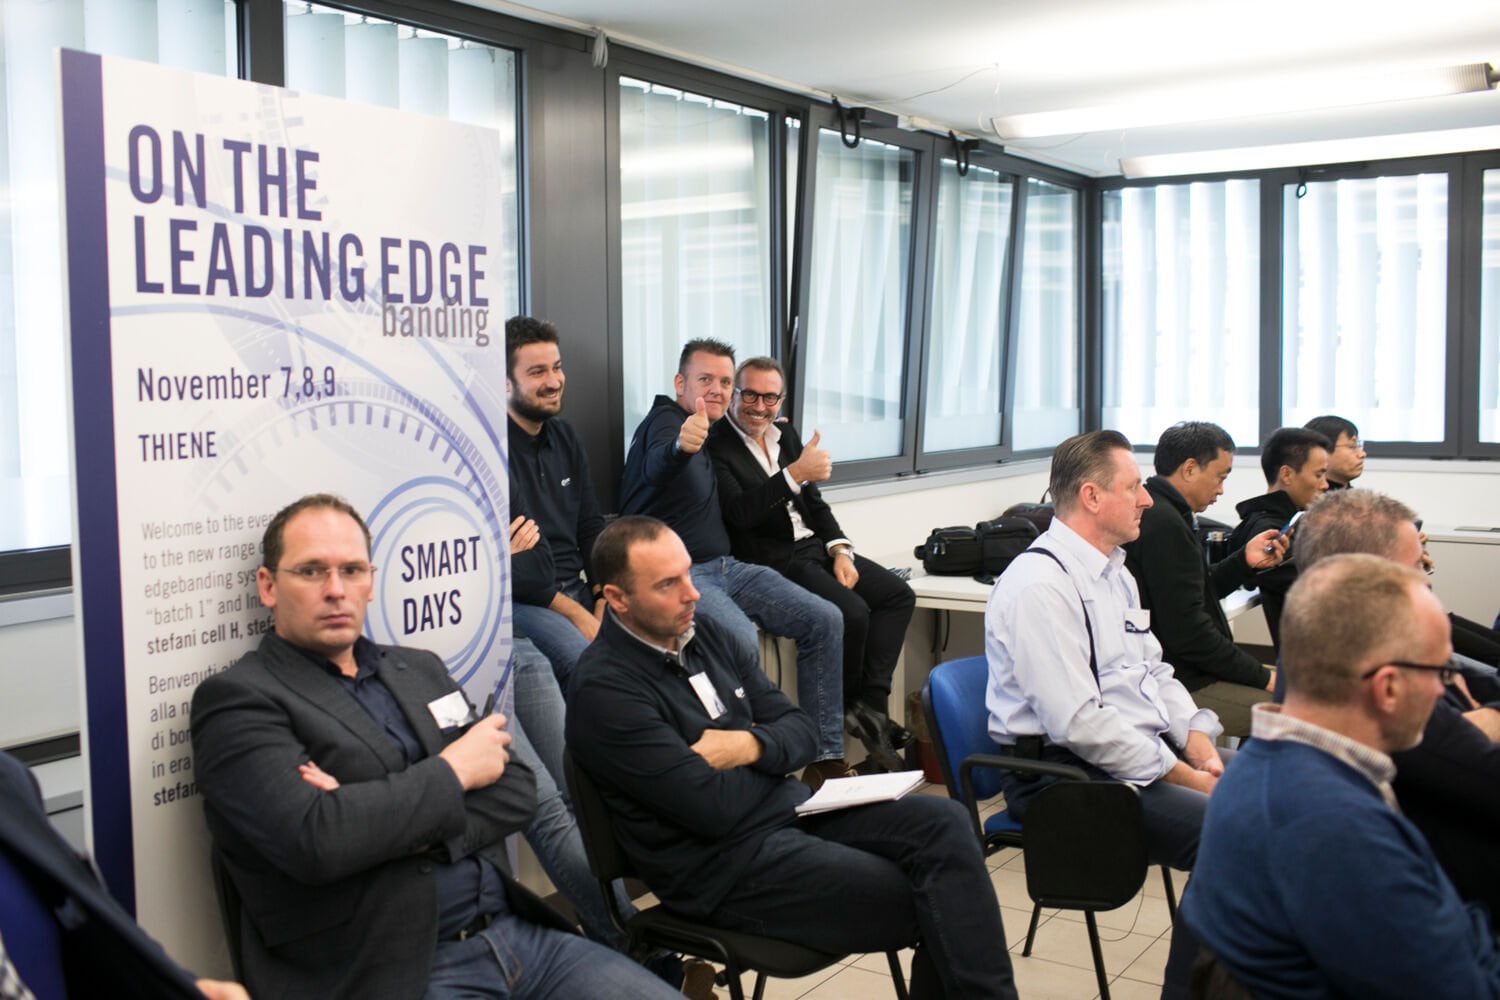 “On the Leading Edgebanding”: a preview of excellence for "batch 1" edgebanding with a Sales Training Day.